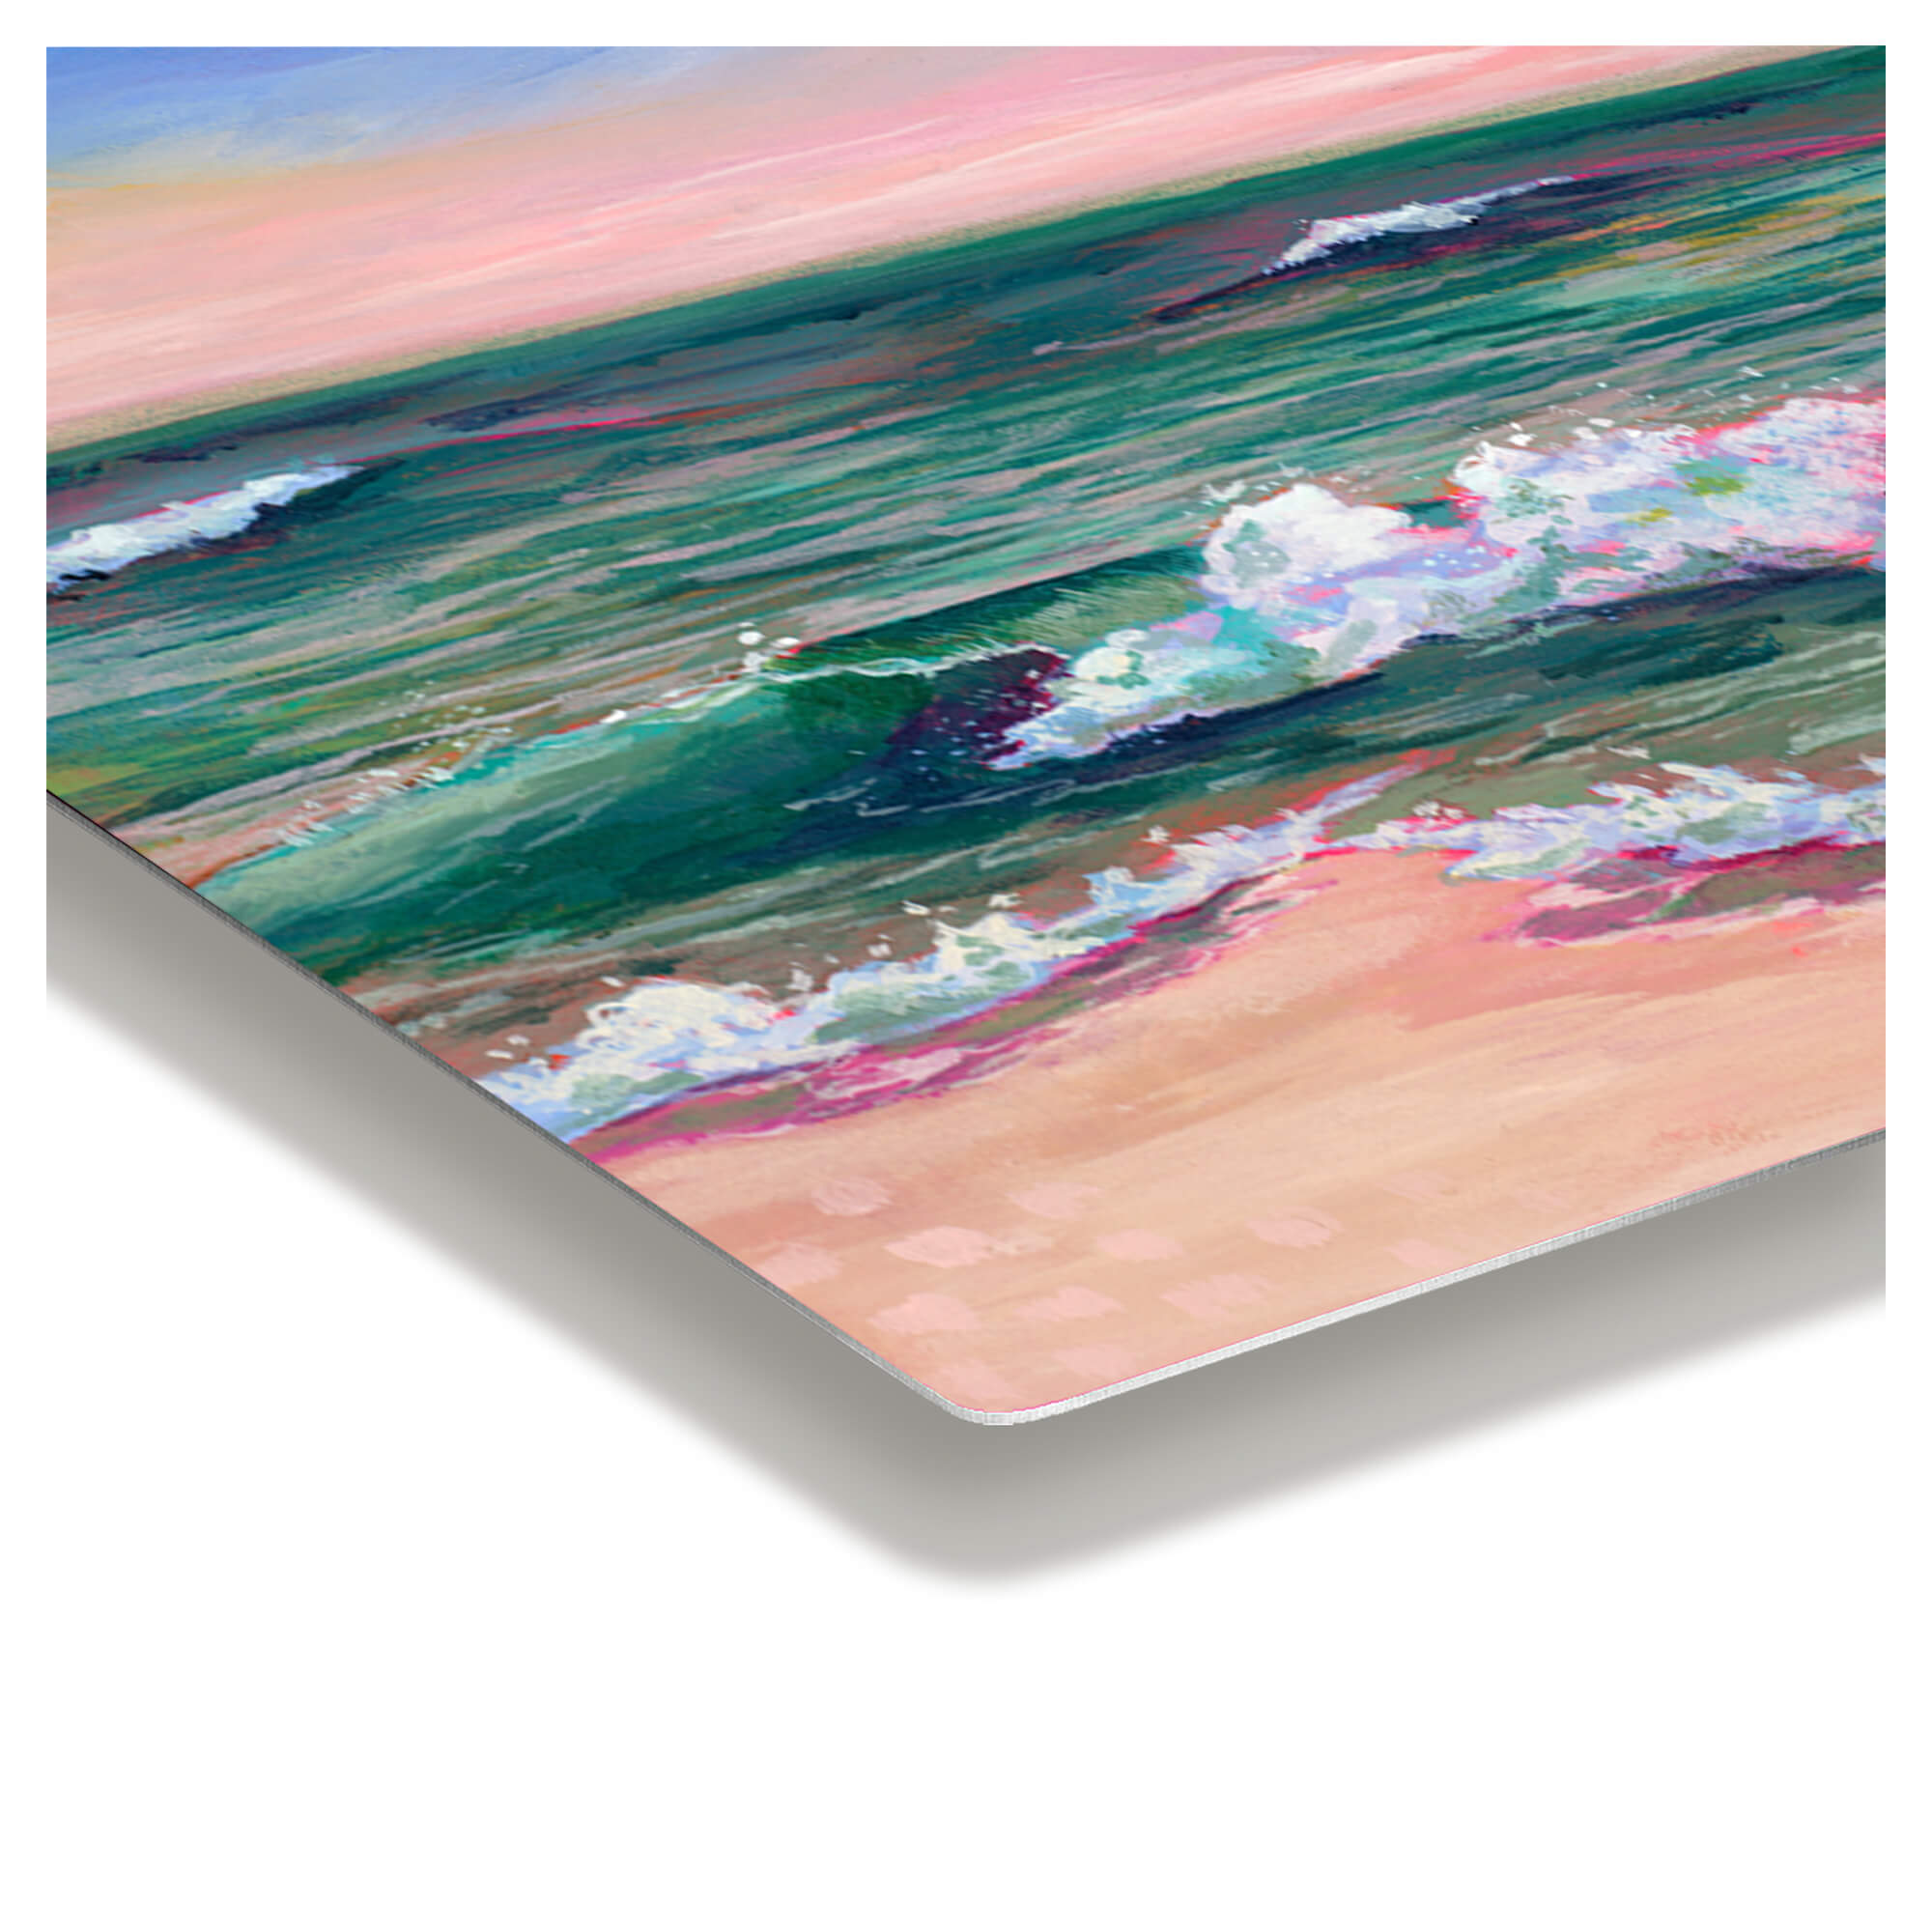 Metal print edge details showing a stunning seascape with emerald waters and pink sky by Hawaii artist Lindsay Wilkins